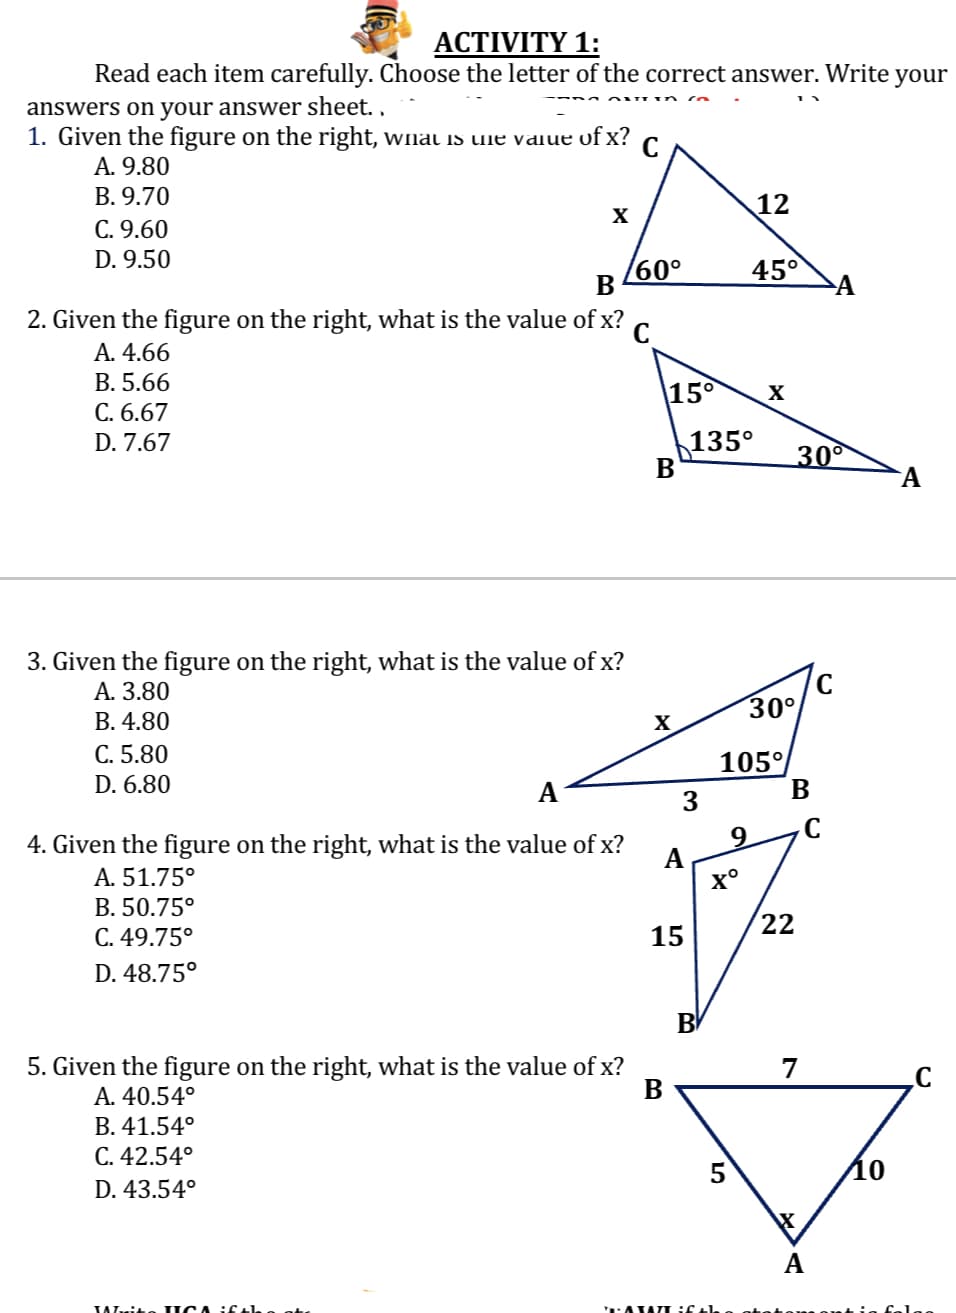 ACTIVITY 1:
Read each item carefully. Choose the letter of the correct answer. Write your
answers on your answer sheet..
1. Given the figure on the right, what is the value of x?
A. 9.80
B. 9.70
C. 9.60
D. 9.50
X
/60°
B
2. Given the figure on the right, what is the value of x? с
A. 4.66
B. 5.66
C. 6.67
D. 7.67
3. Given the figure on the right, what is the value of x?
A. 3.80
#
B. 4.80
C. 5.80
D. 6.80
A
4. Given the figure on the right, what is the value of x?
A. 51.75°
B. 50.75°
C. 49.75°
D. 48.75°
Writo IGA
15⁰
X
5. Given the figure on the right, what is the value of x?
A. 40.54°
B
B. 41.54°
C. 42.54°
D. 43.54°
A
15
3
TAXATI
135°
B
45°
12
Xº
9
X
30°
105°
B
22
30°
7
A
XXX
A
C
10
A
C